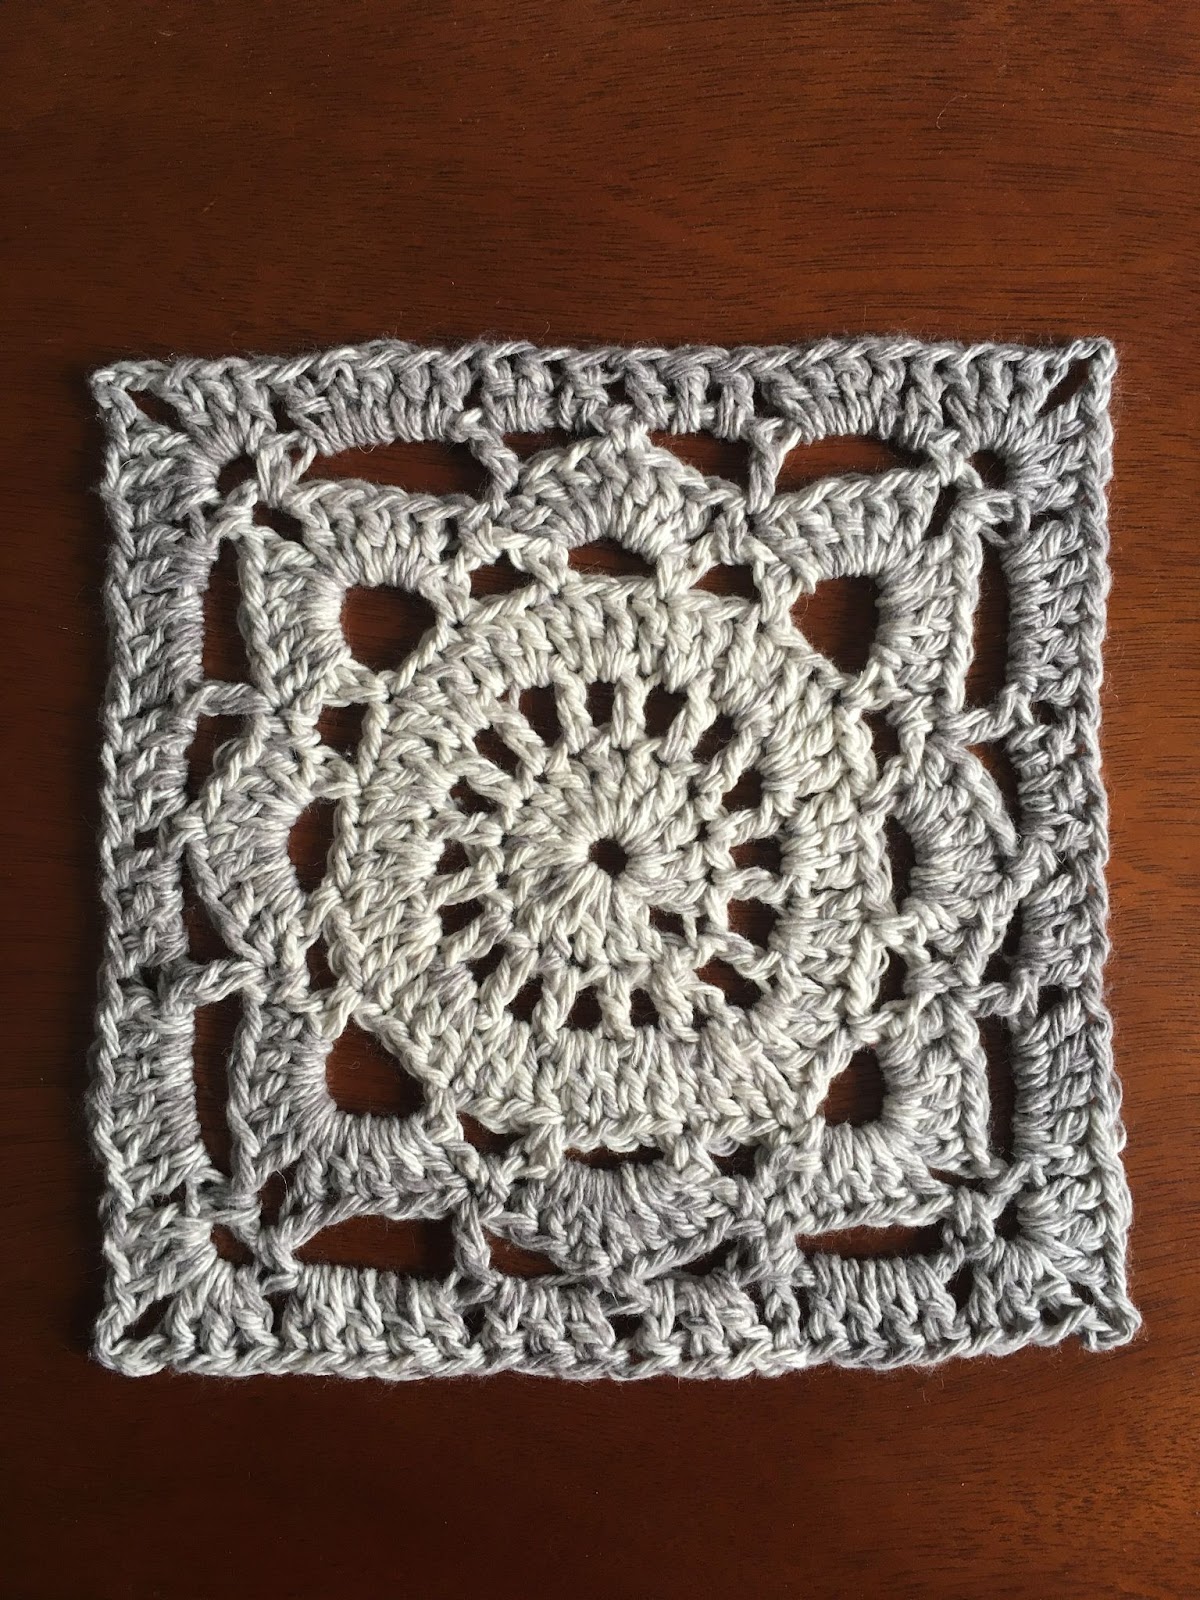 A grey crocheted square, designed in an intricate, snowflake-like pattern.